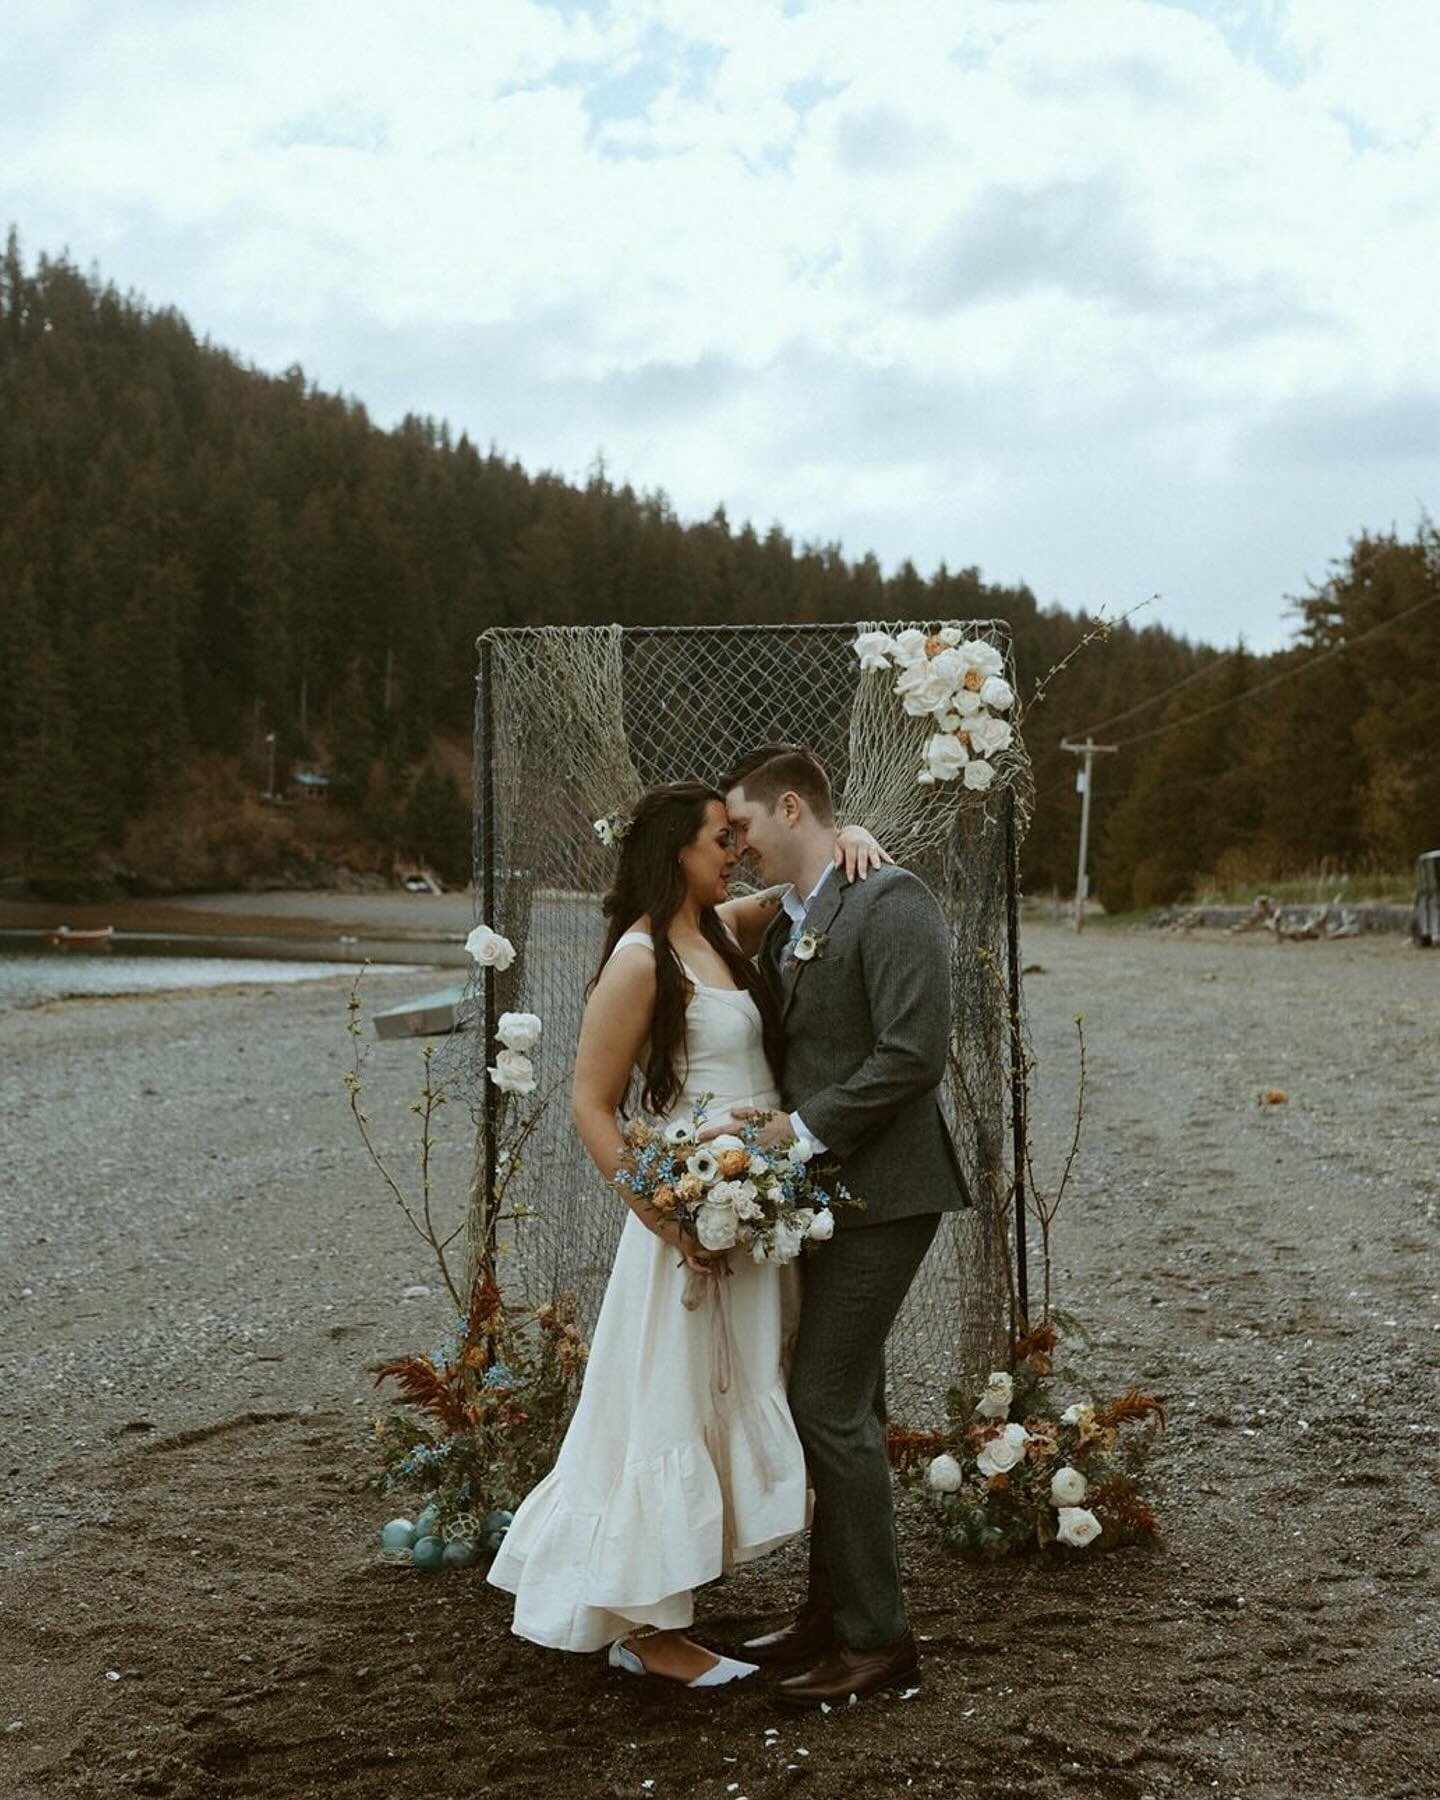 Did you even get married in Alaska if you didn&rsquo;t use a fishing net as your arbor?!

Photography: @thehitchedhiker 
Venue: @betweenbeachesalaska 
Florals: @honeybloomfloraldesign
MUA: @dollhouse.ak 
Hair: @hairplayak